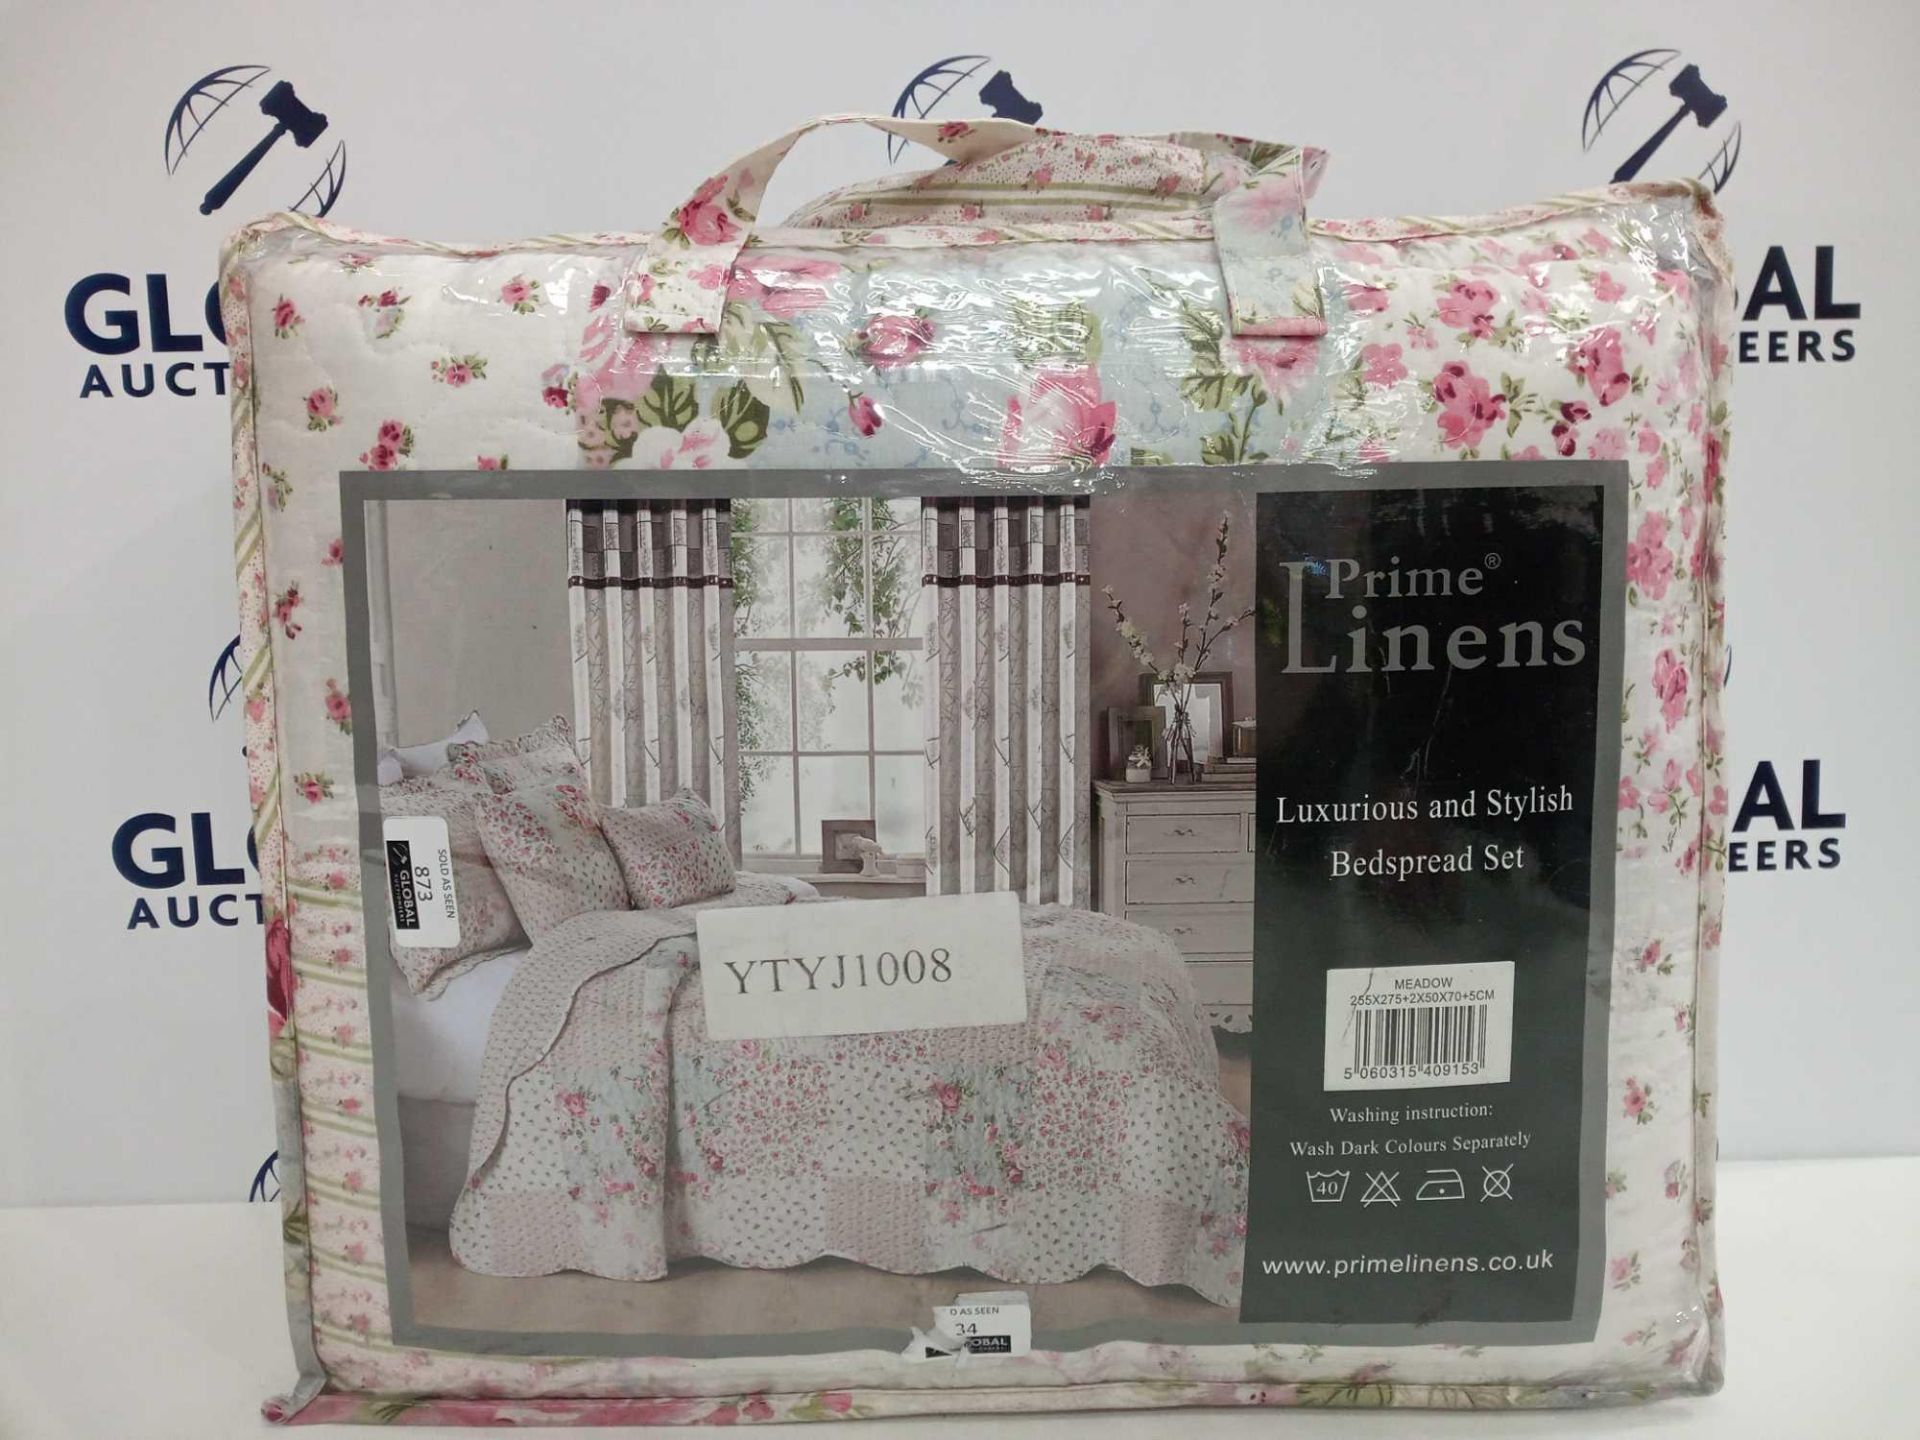 Rrp £90 Prime Linens Luxurious And Stylish Meadow Super King Bedspread Set - Image 2 of 2